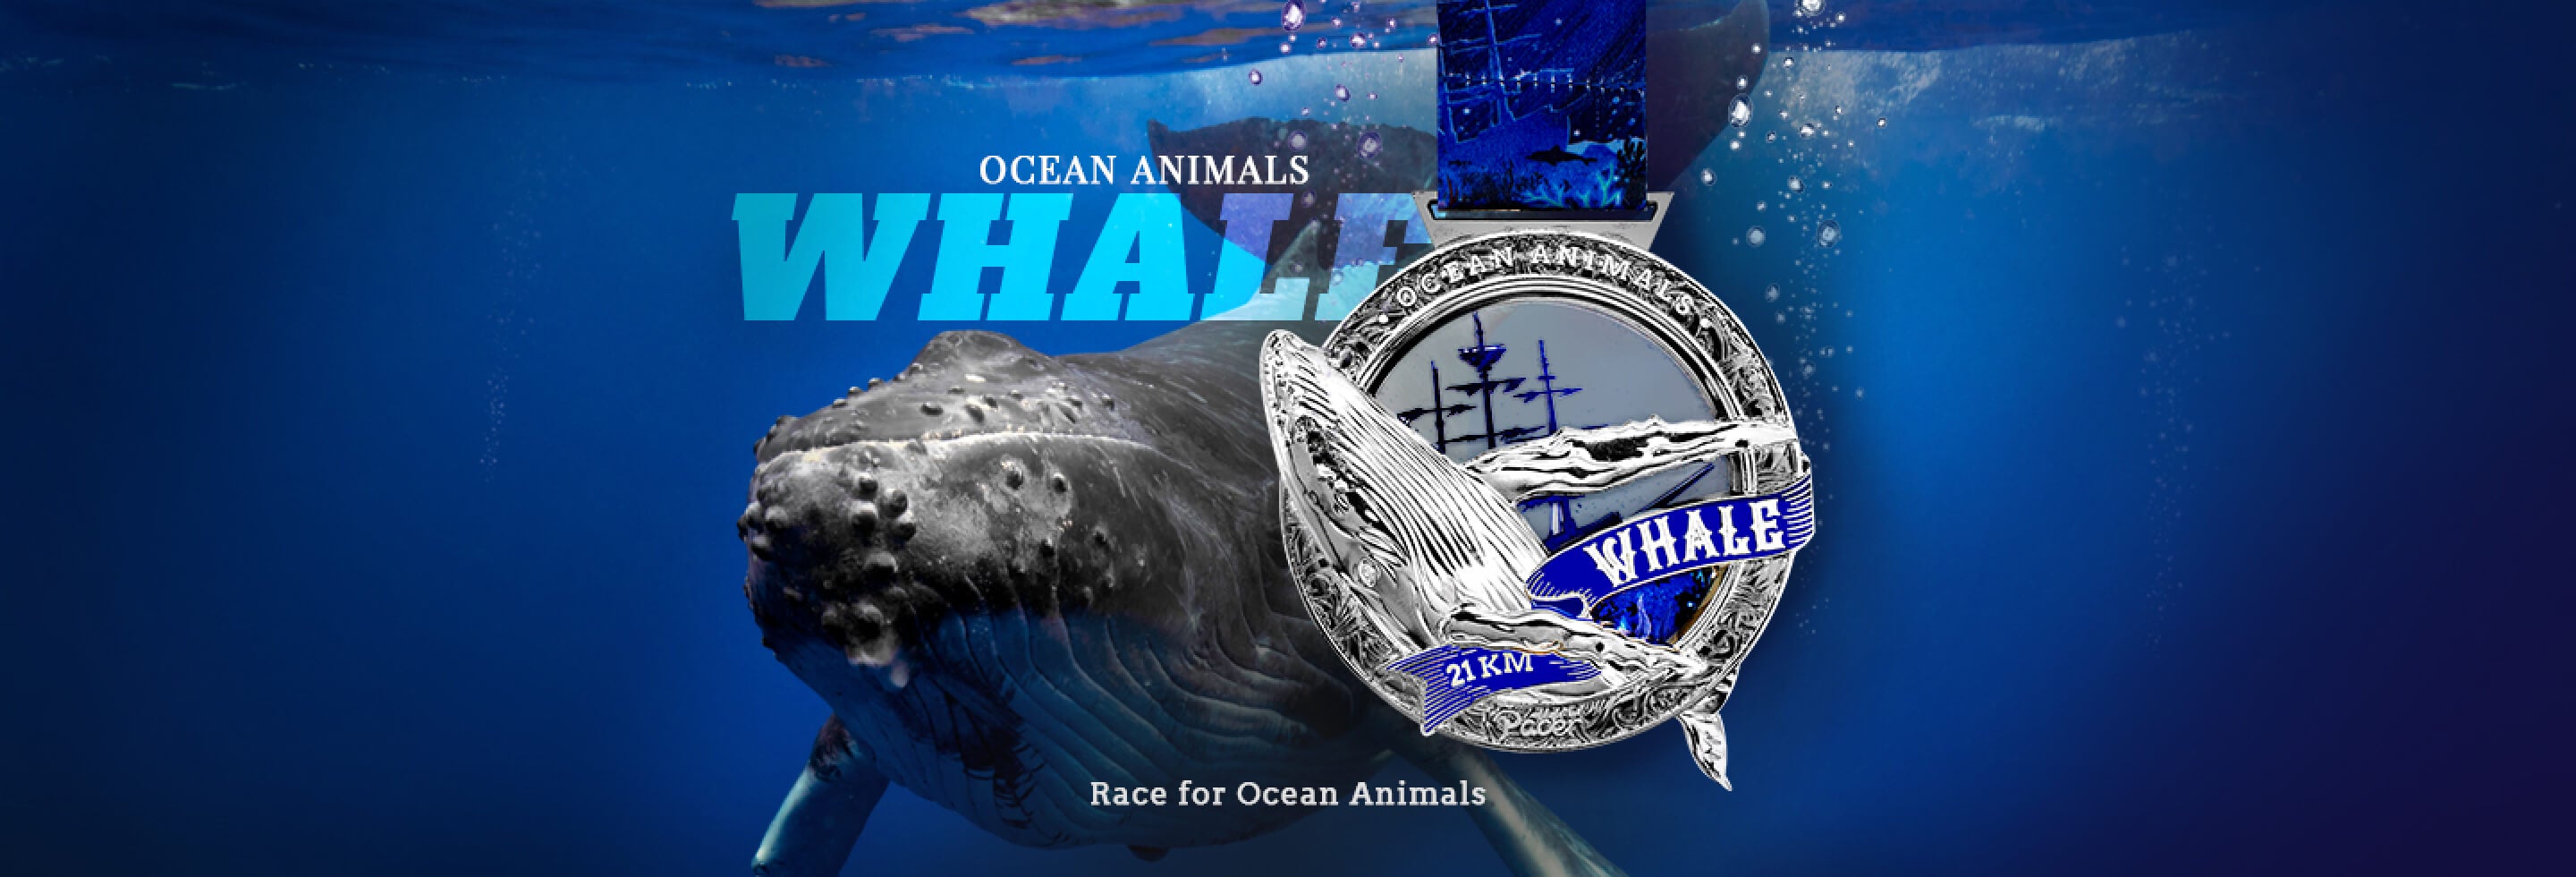 Race for Ocean Animals - Whale 21km